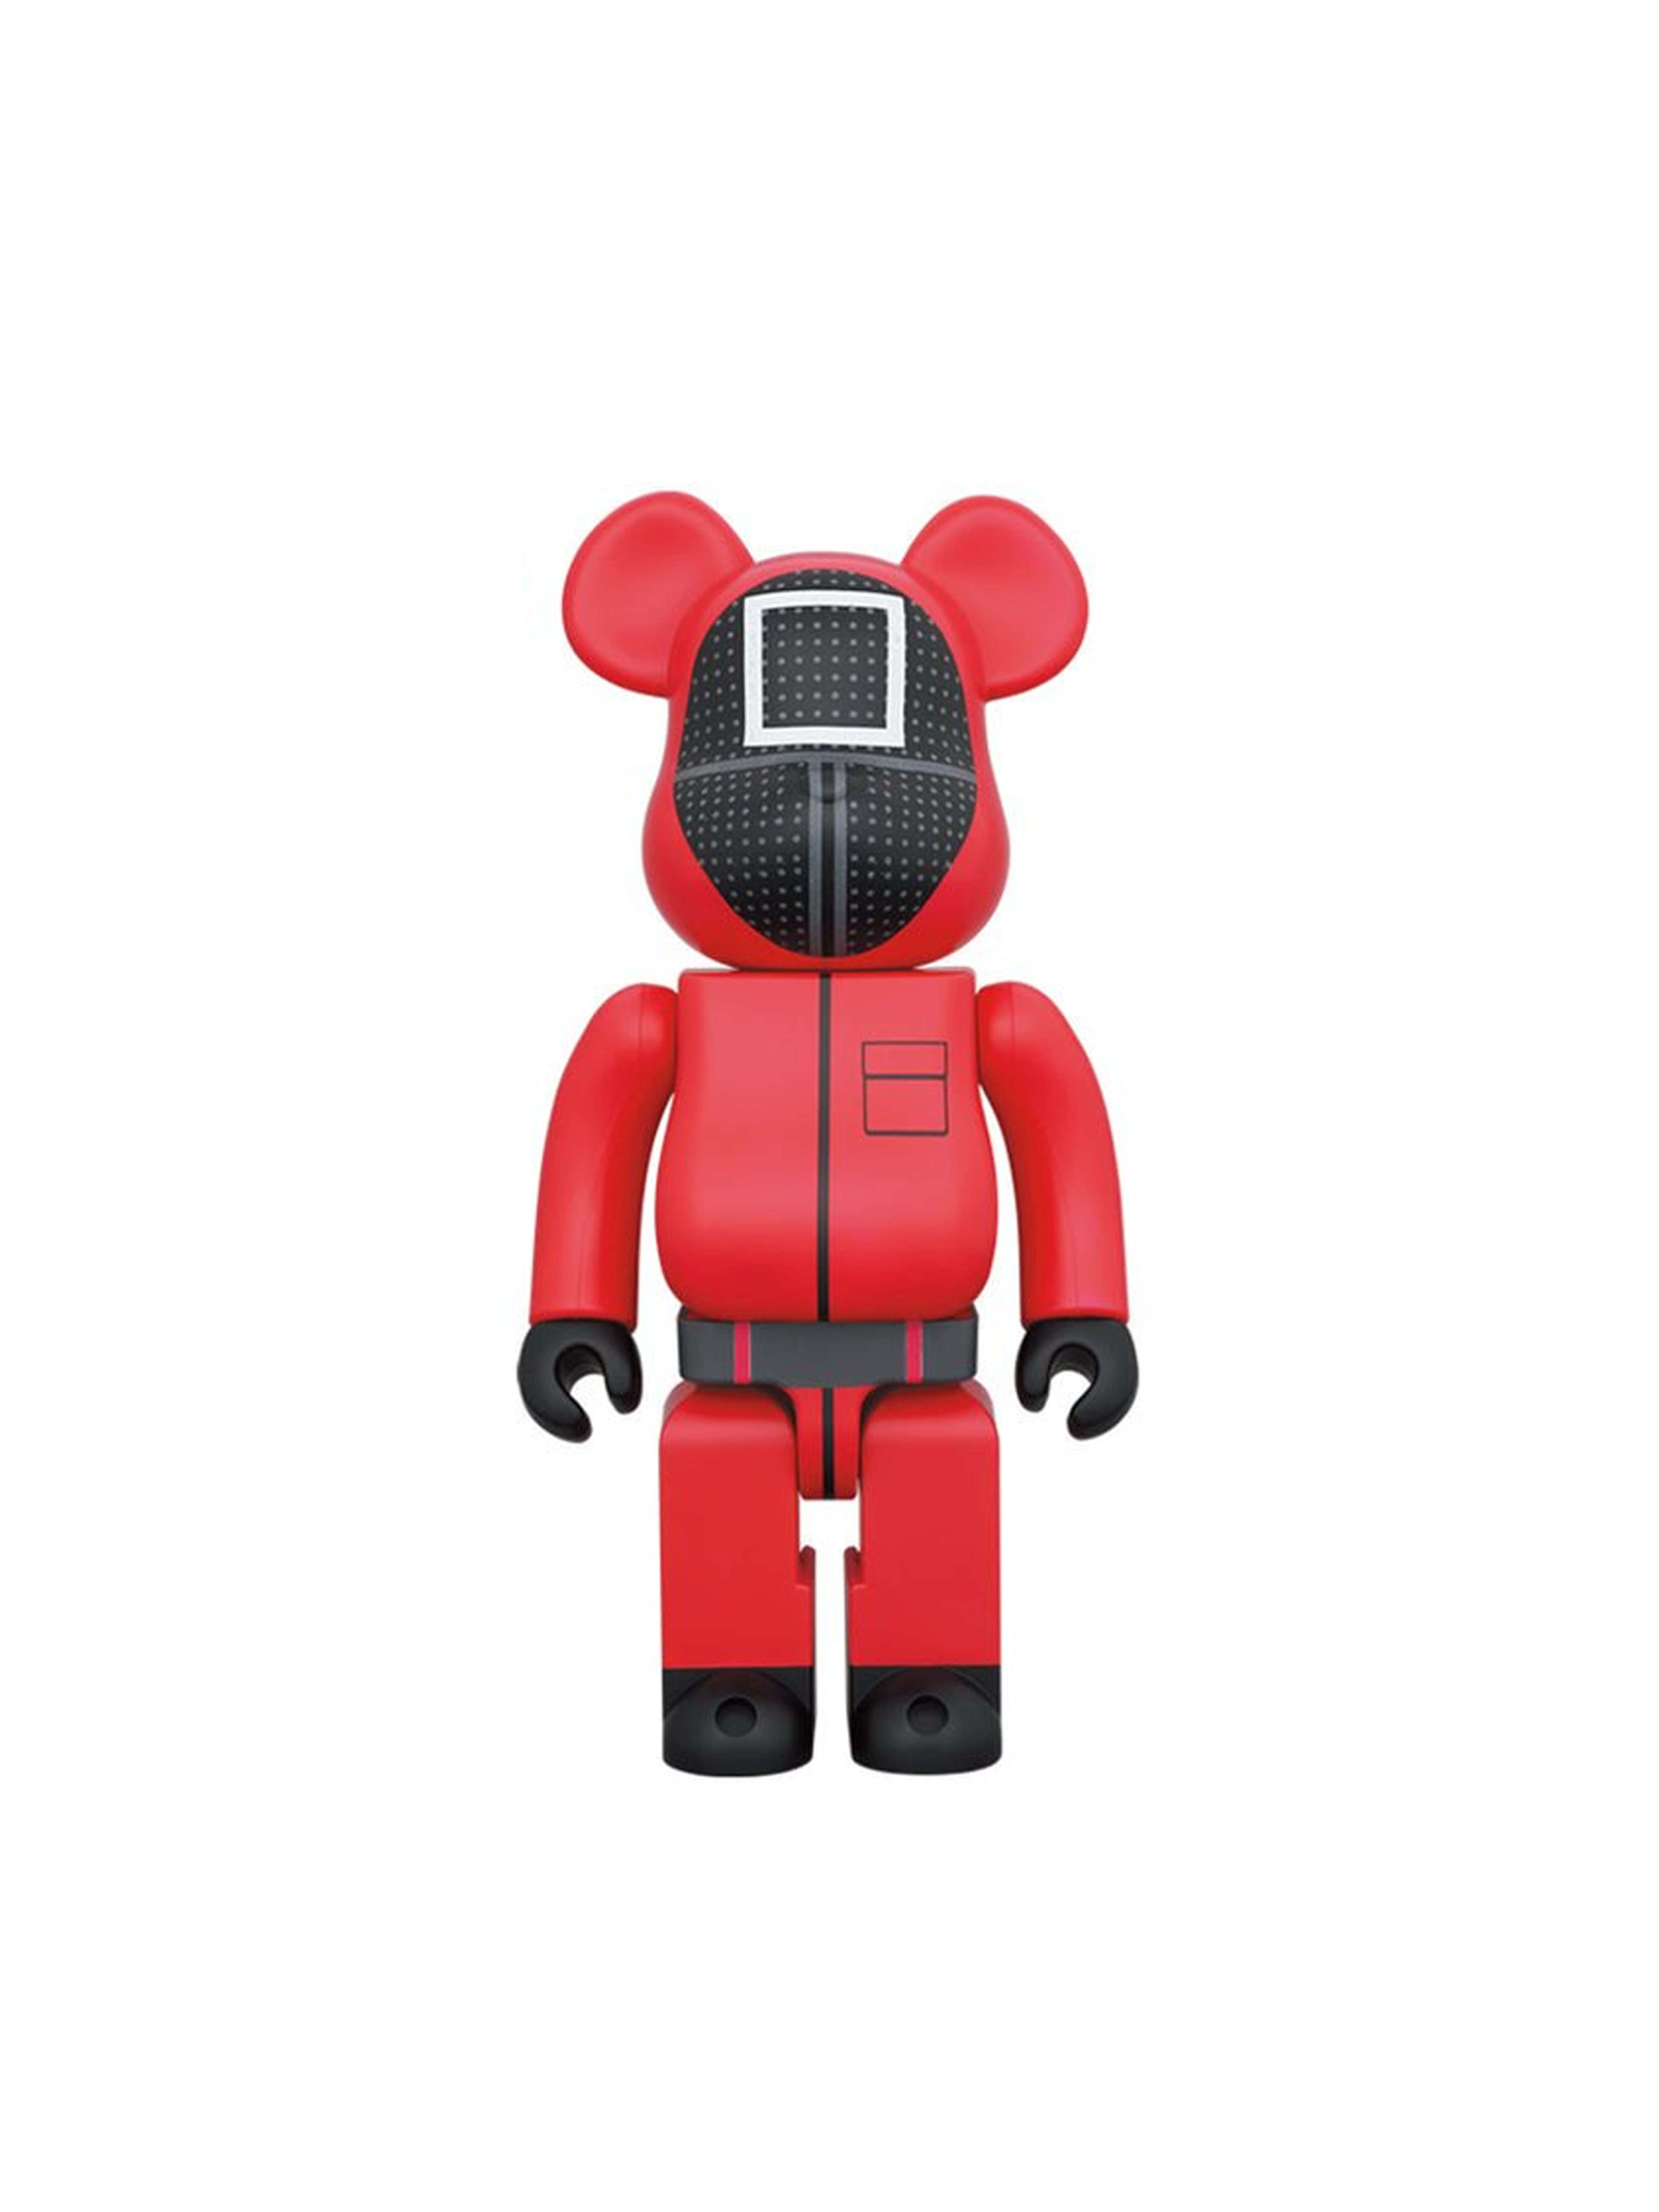 Alternate View 2 of BE@RBRICK Squid Game Guard (Square) 1000％